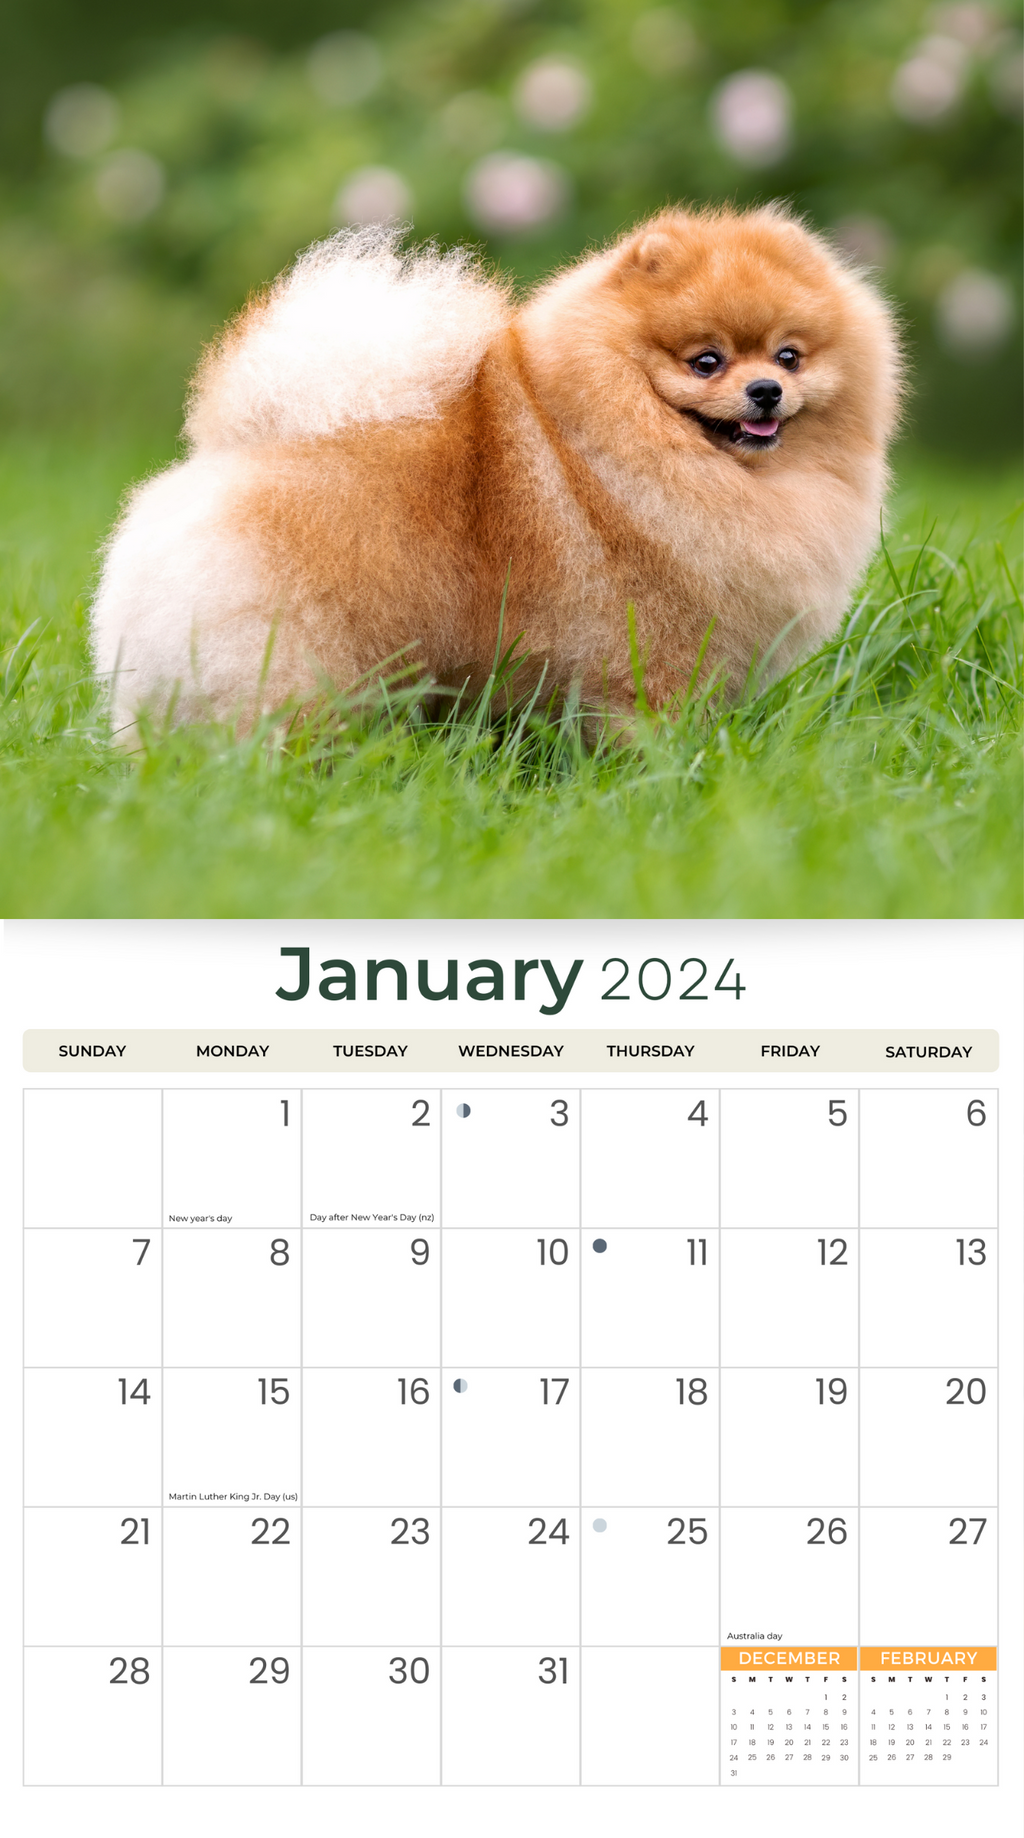 2024 Pomeranians Deluxe Wall Calendar Dogs & Puppies Calendars By